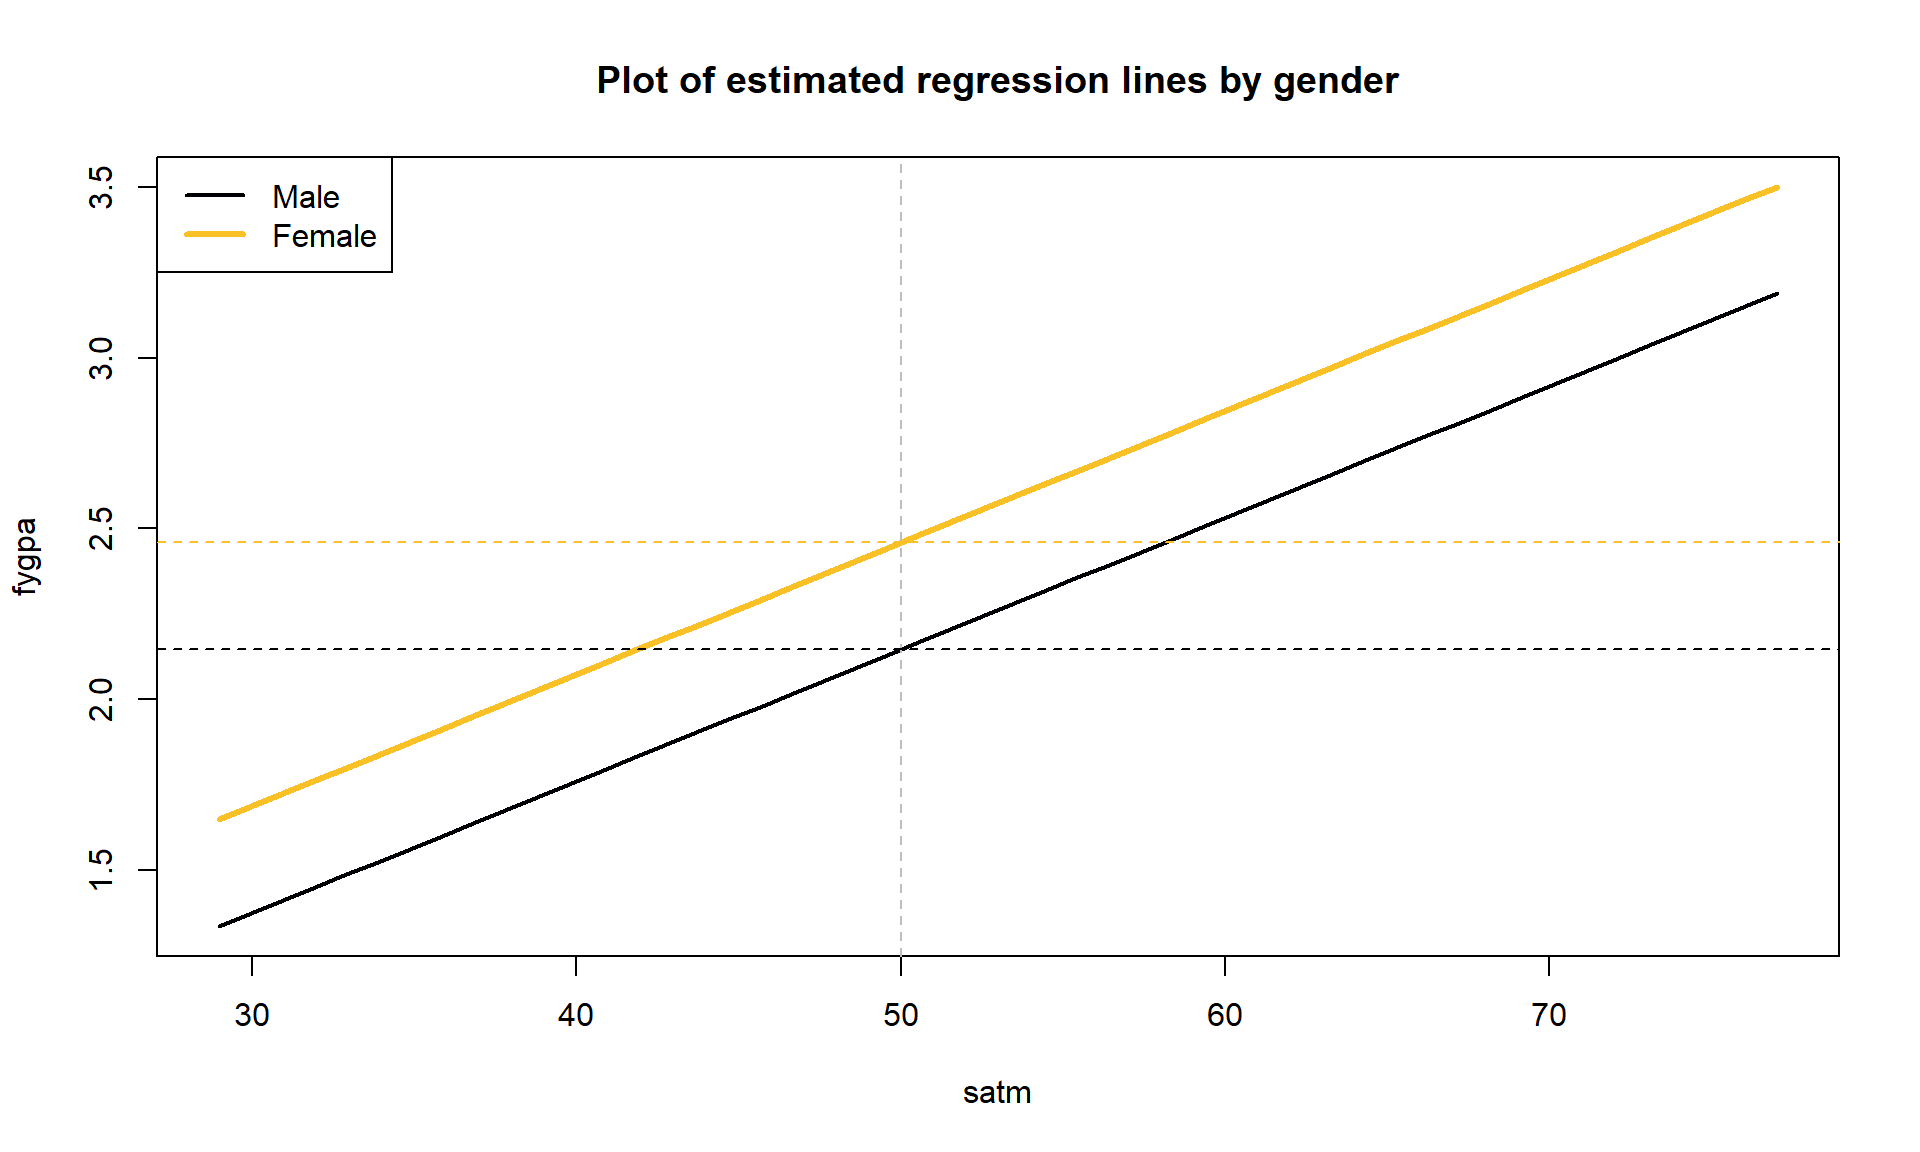 Plot of estimated model for fygpa vs satm by GENDER of students (female line is thicker dark line). Dashed lines aid in seeing the consistent vertical difference of 0.313 in the two estimated lines based on the model containing a different intercept for each group.